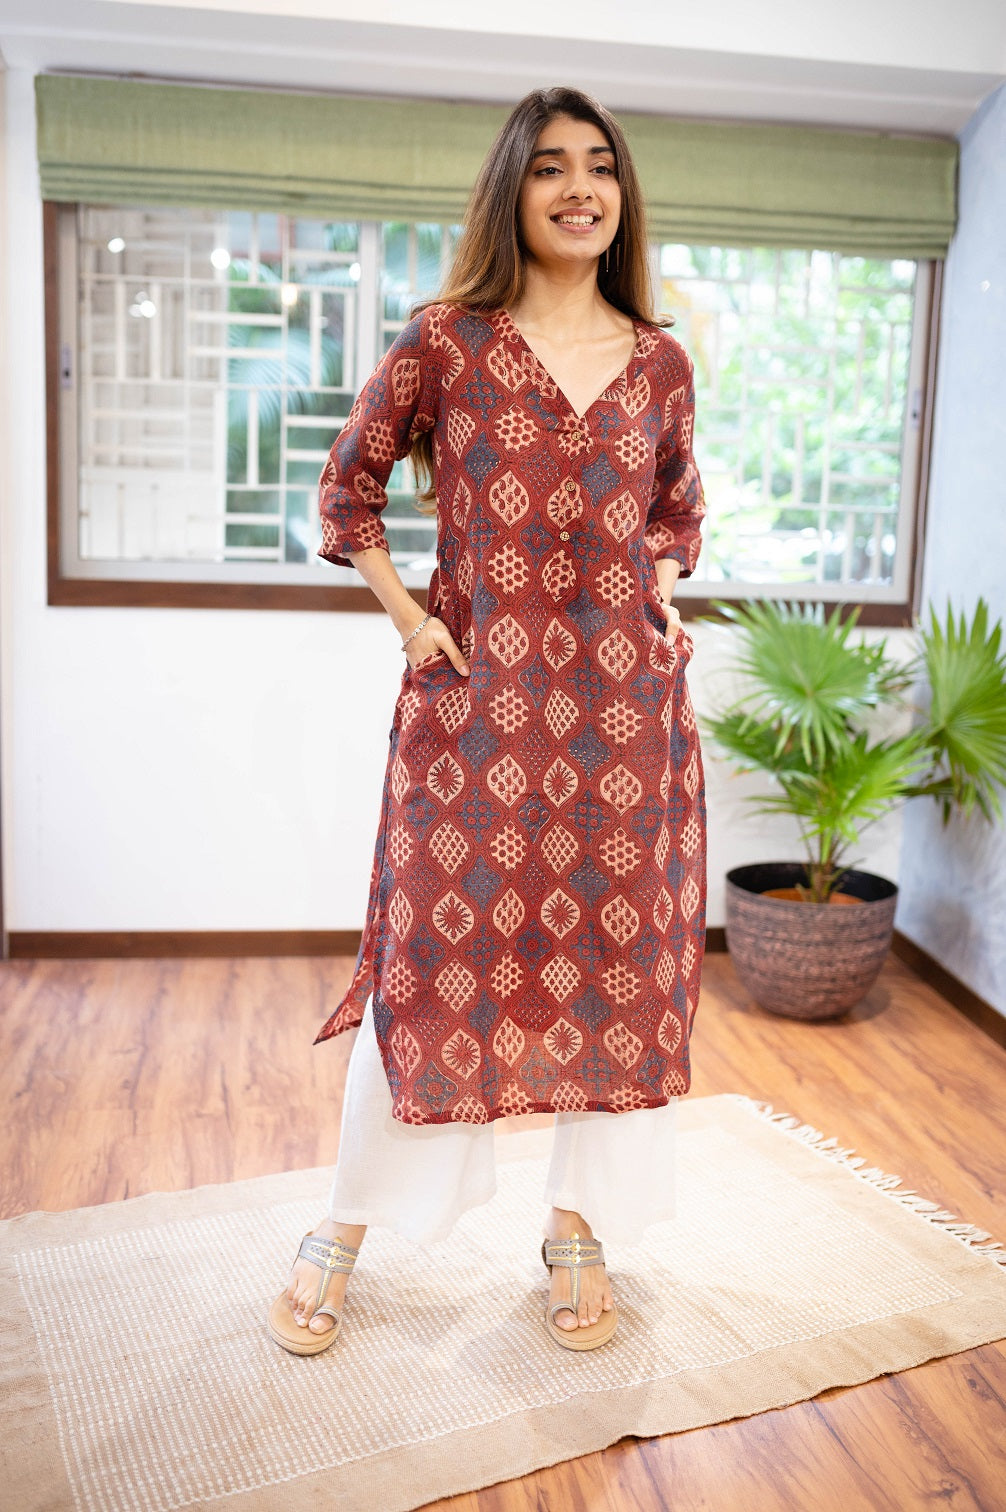 Full 4K Collection of Amazing Simple Kurti Design 2019 Images: Top 999+